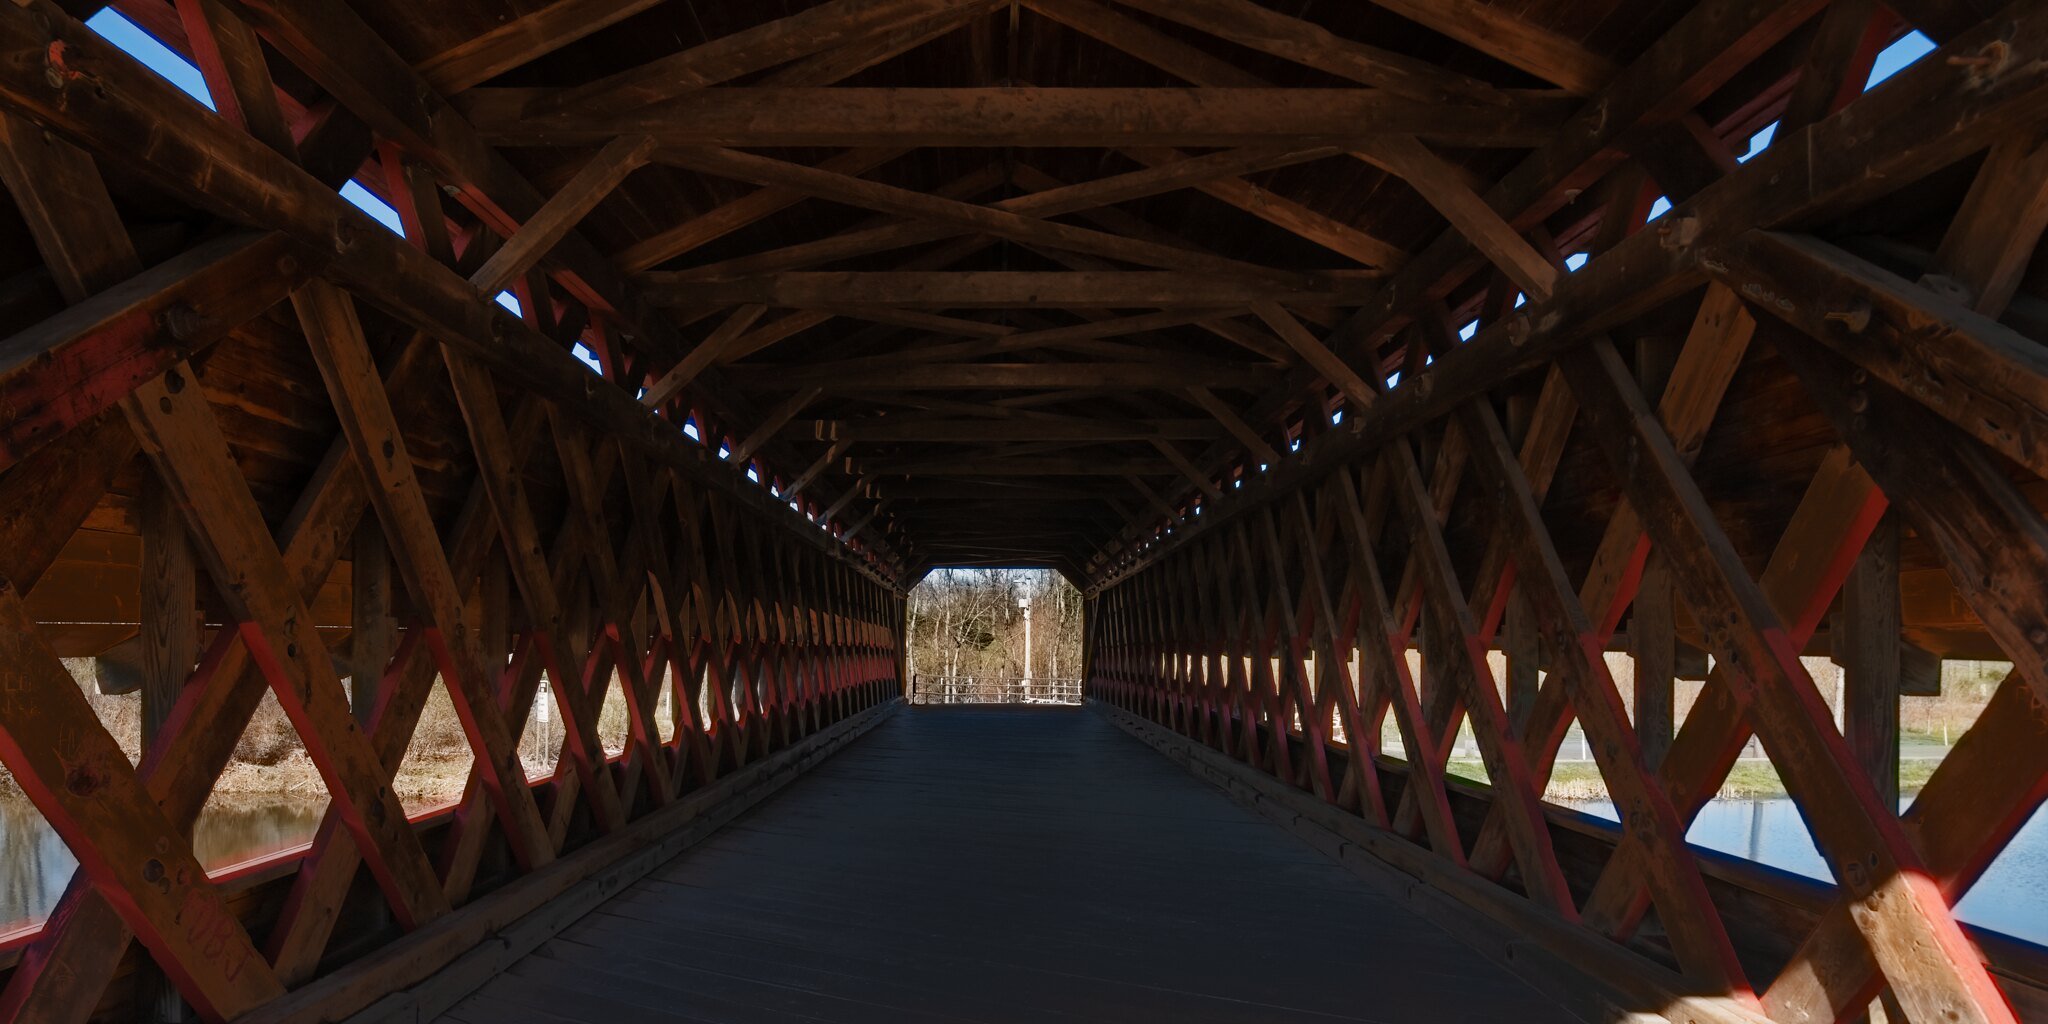  Inside Sachs Covered Bridge in Gettysburg, Adams County, PA.  Built in 1854 and restored in 1997 after a flood.  